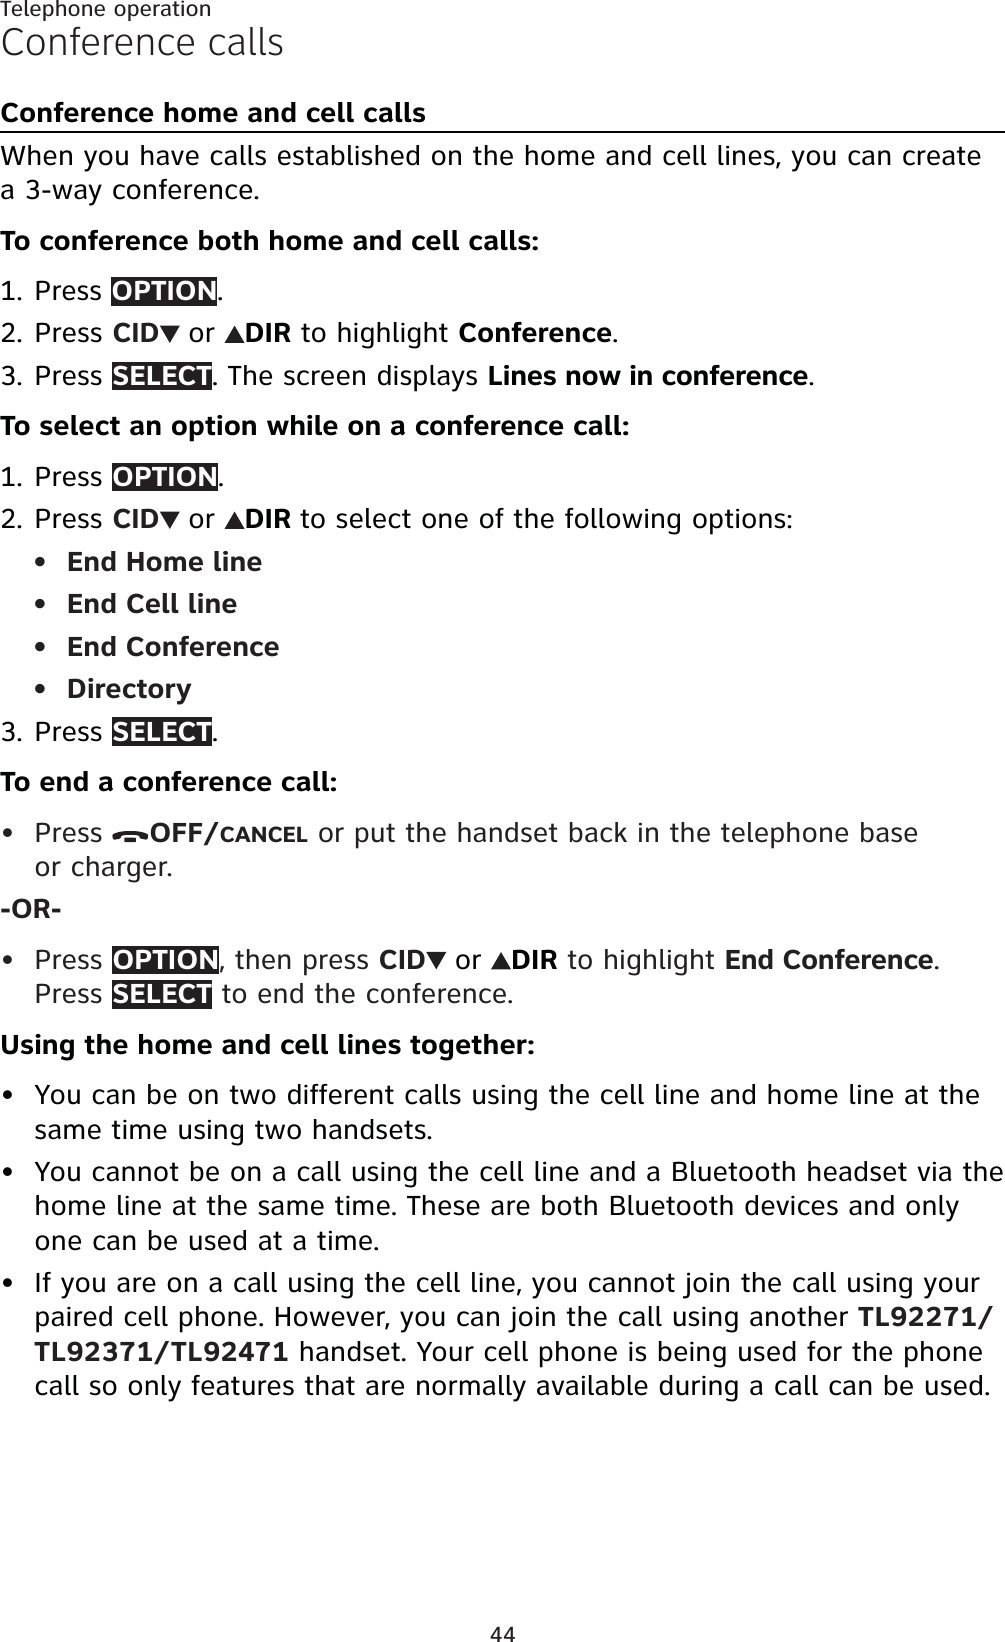 44Telephone operationConference callsConference home and cell callsWhen you have calls established on the home and cell lines, you can create a 3-way conference.To conference both home and cell calls:Press OPTION.Press CID or DIR to highlight Conference.Press SELECT. The screen displays Lines now in conference.To select an option while on a conference call:PressOPTION.Press CID or DIR to select one of the following options:End Home lineEnd Cell lineEnd ConferenceDirectoryPress SELECT.To end a conference call:Press  OFF/CANCEL or put the handset back in the telephone base or charger.-OR-Press OPTION, then press CID or DIR to highlight End Conference.Press SELECT to end the conference.Using the home and cell lines together:You can be on two different calls using the cell line and home line at the same time using two handsets.You cannot be on a call using the cell line and a Bluetooth headset via the home line at the same time. These are both Bluetooth devices and only one can be used at a time.If you are on a call using the cell line, you cannot join the call using your paired cell phone. However, you can join the call using another TL92271/TL92371/TL92471 handset. Your cell phone is being used for the phone call so only features that are normally available during a call can be used.1.2.3.1.2.••••3.•••••